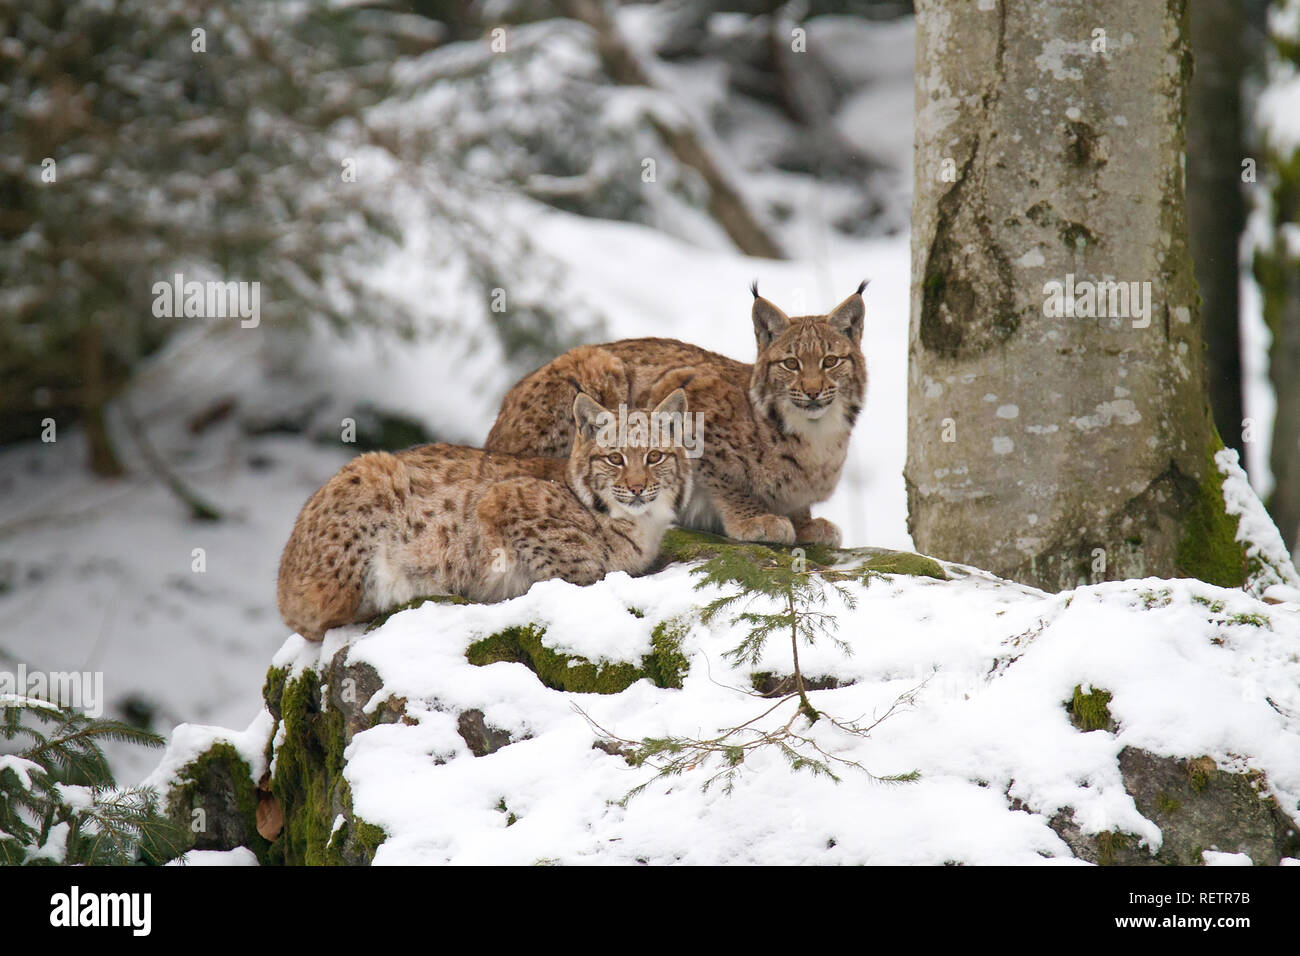 Two Linx on the snow Stock Photo